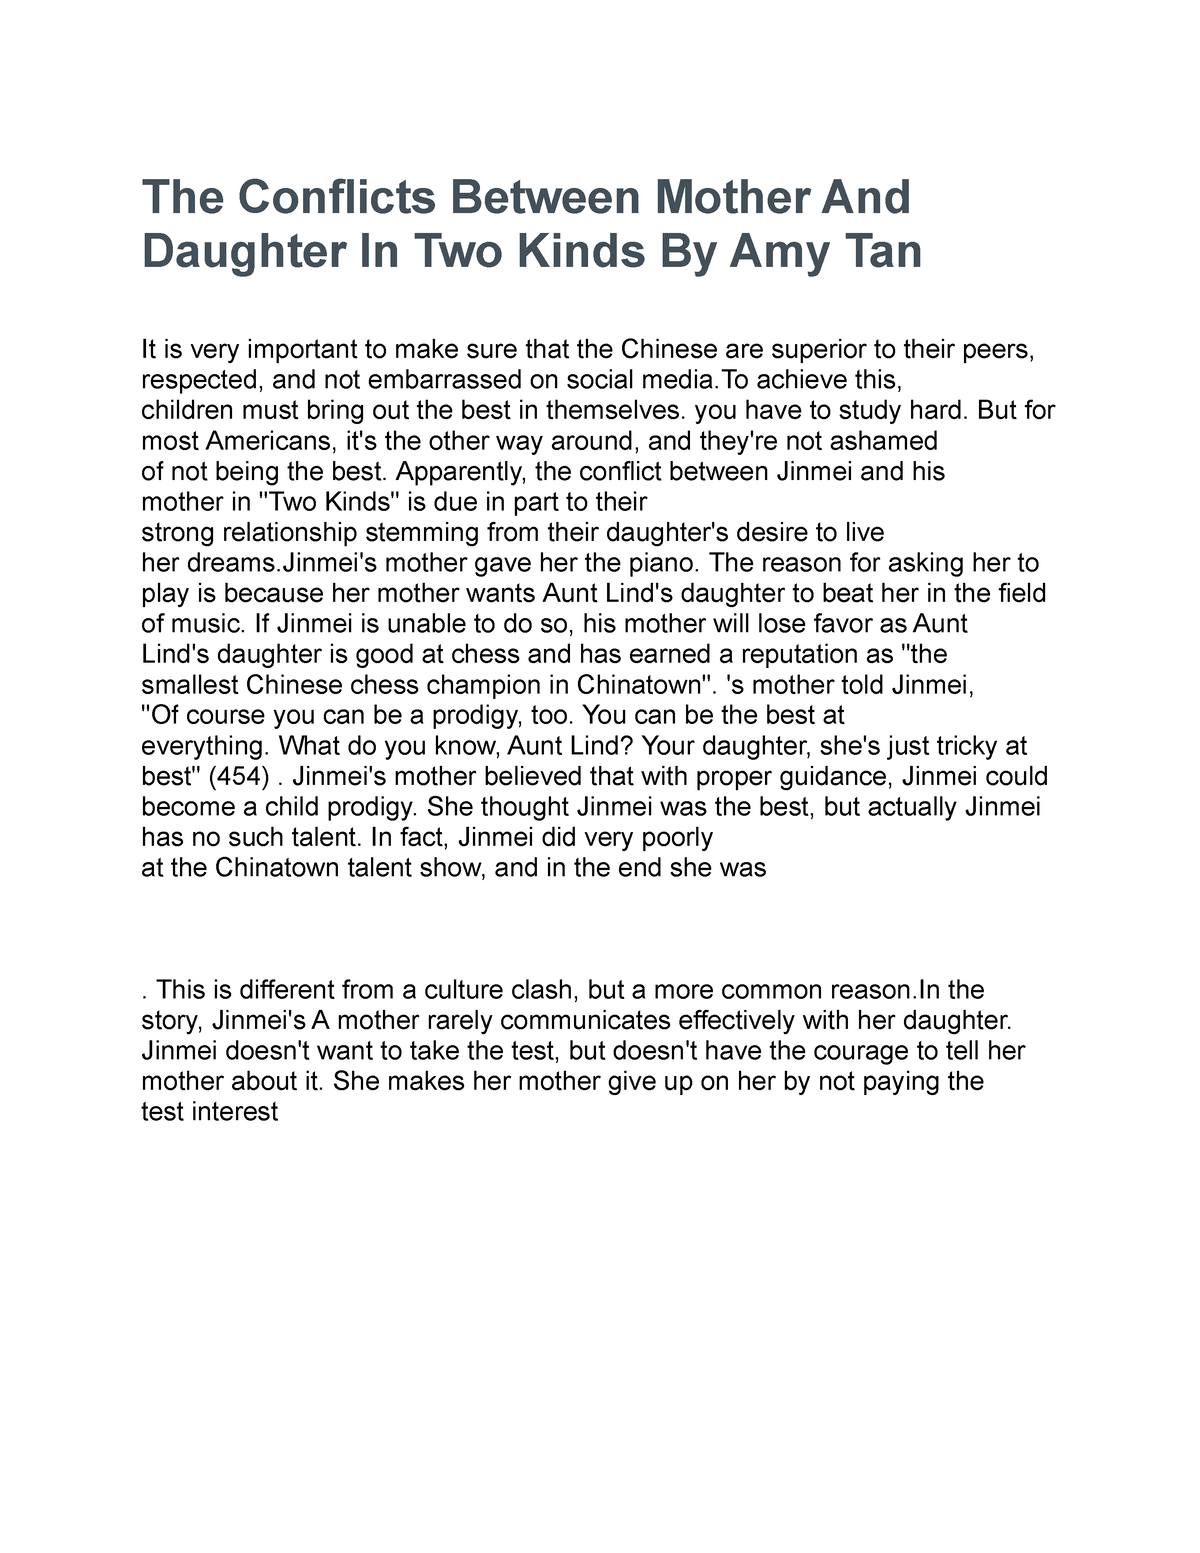 two kinds by amy tan quiz